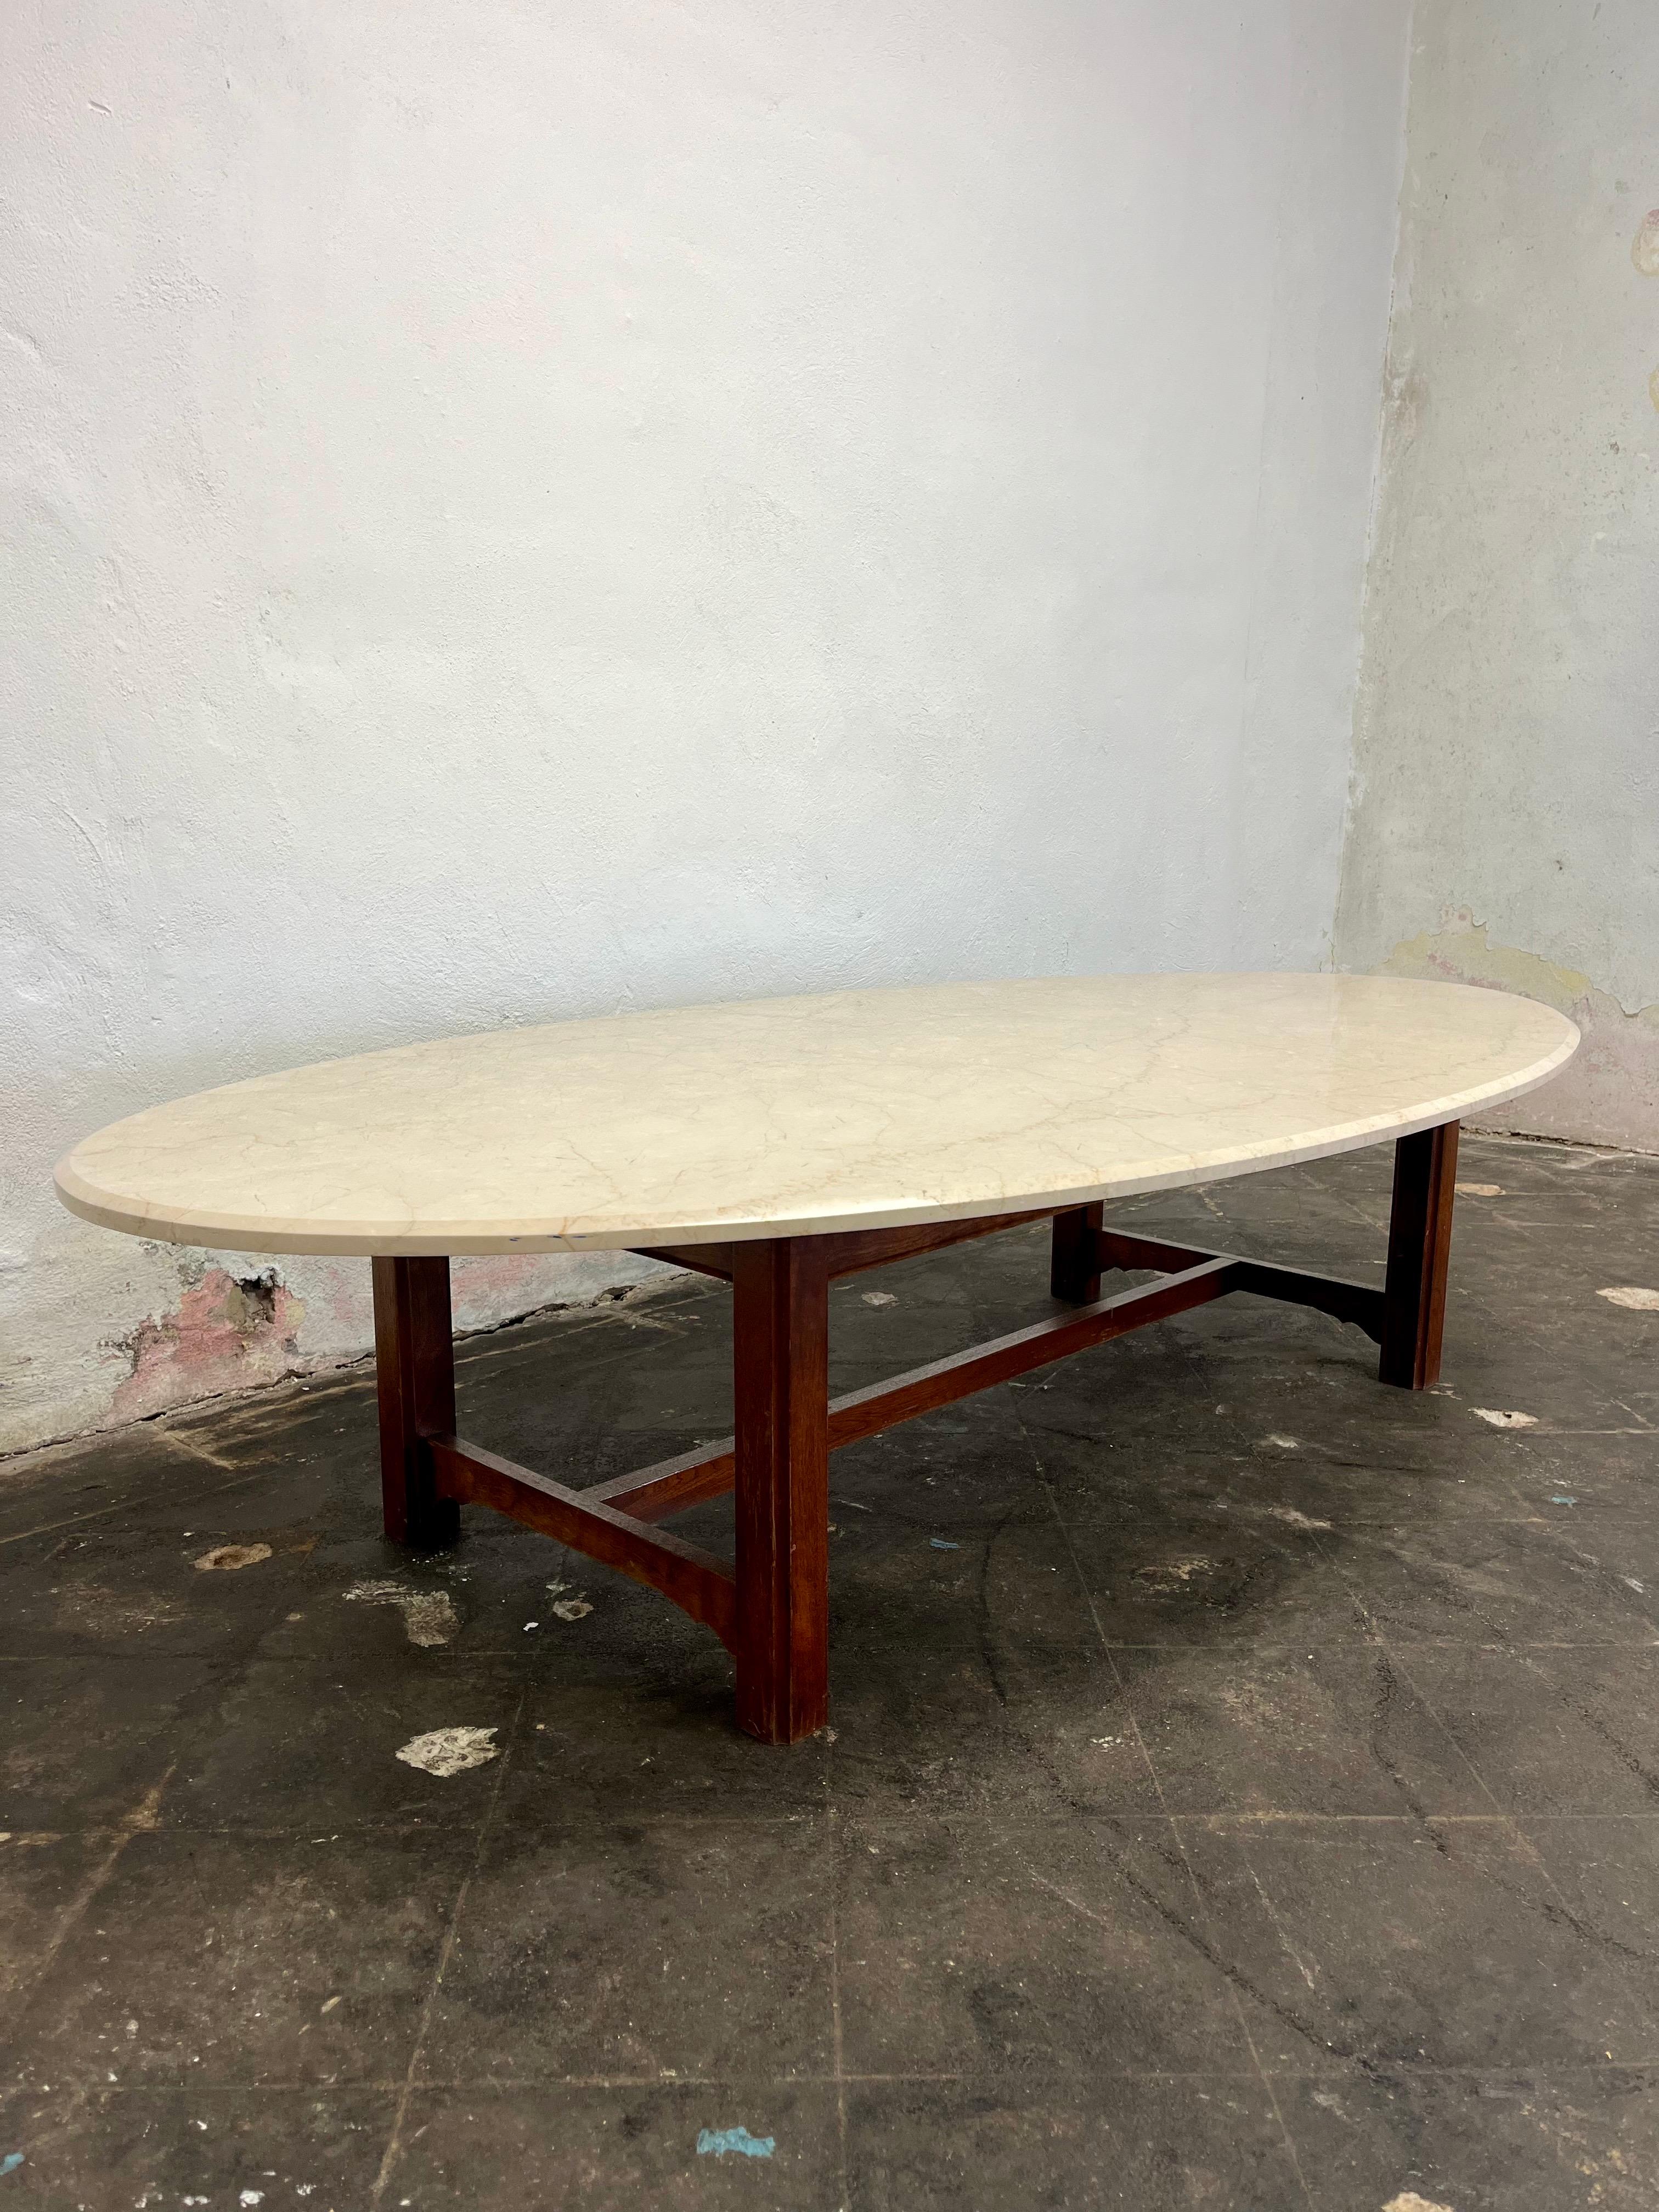 Oval beveled edge surfboard on wood base. Sleek design. Stone top in polished marble or travertine.
Curbside to NYC/Philly $350(will need muscle due to weight)